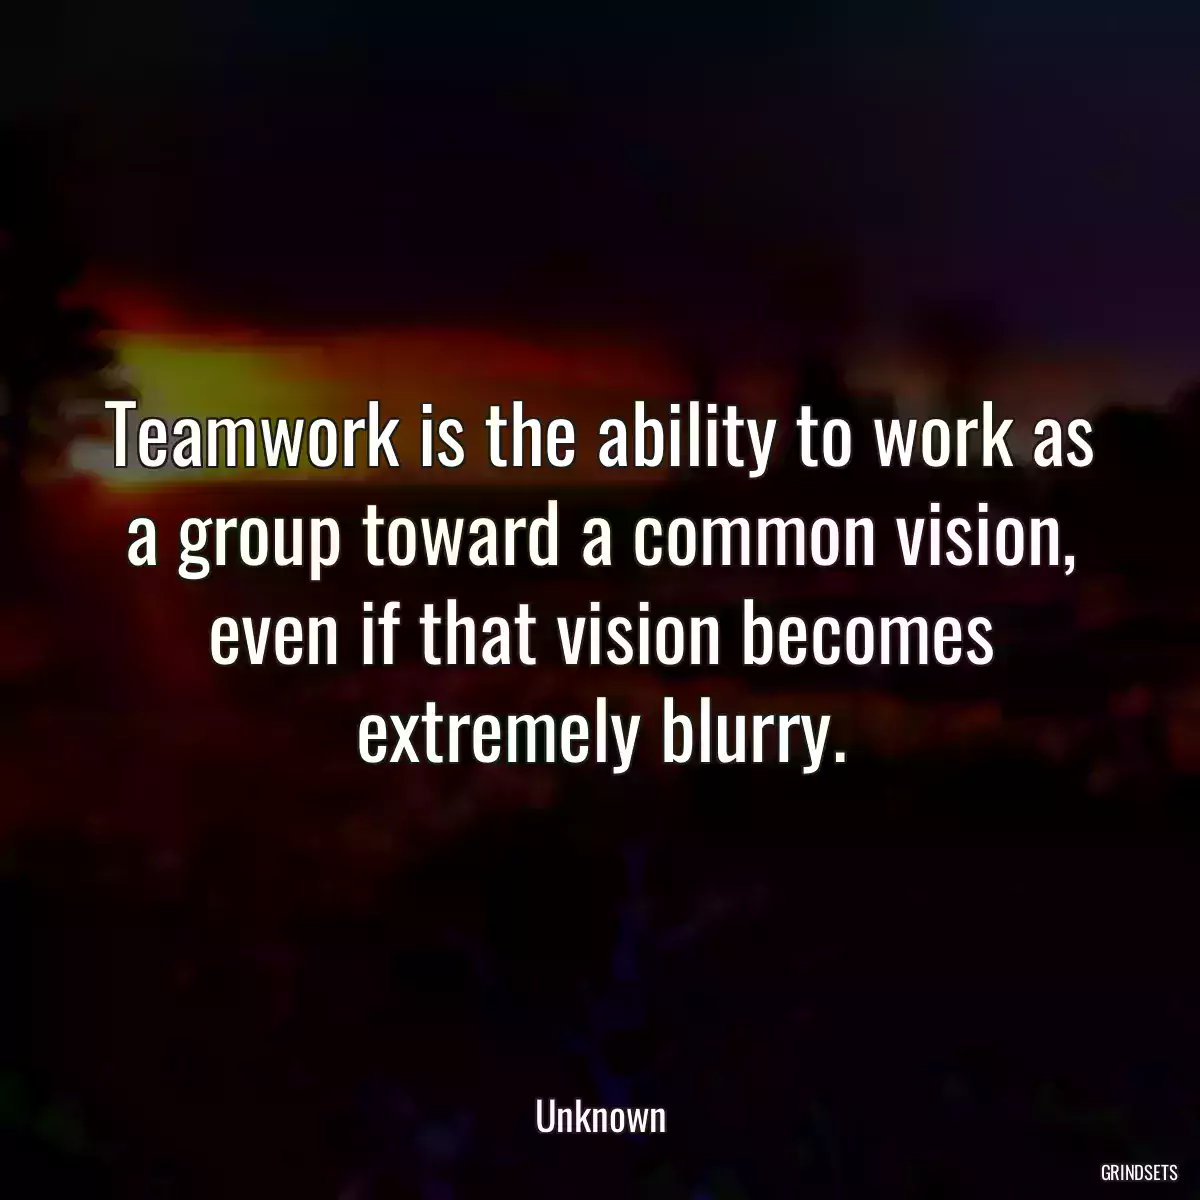 Teamwork is the ability to work as a group toward a common vision, even if that vision becomes extremely blurry.